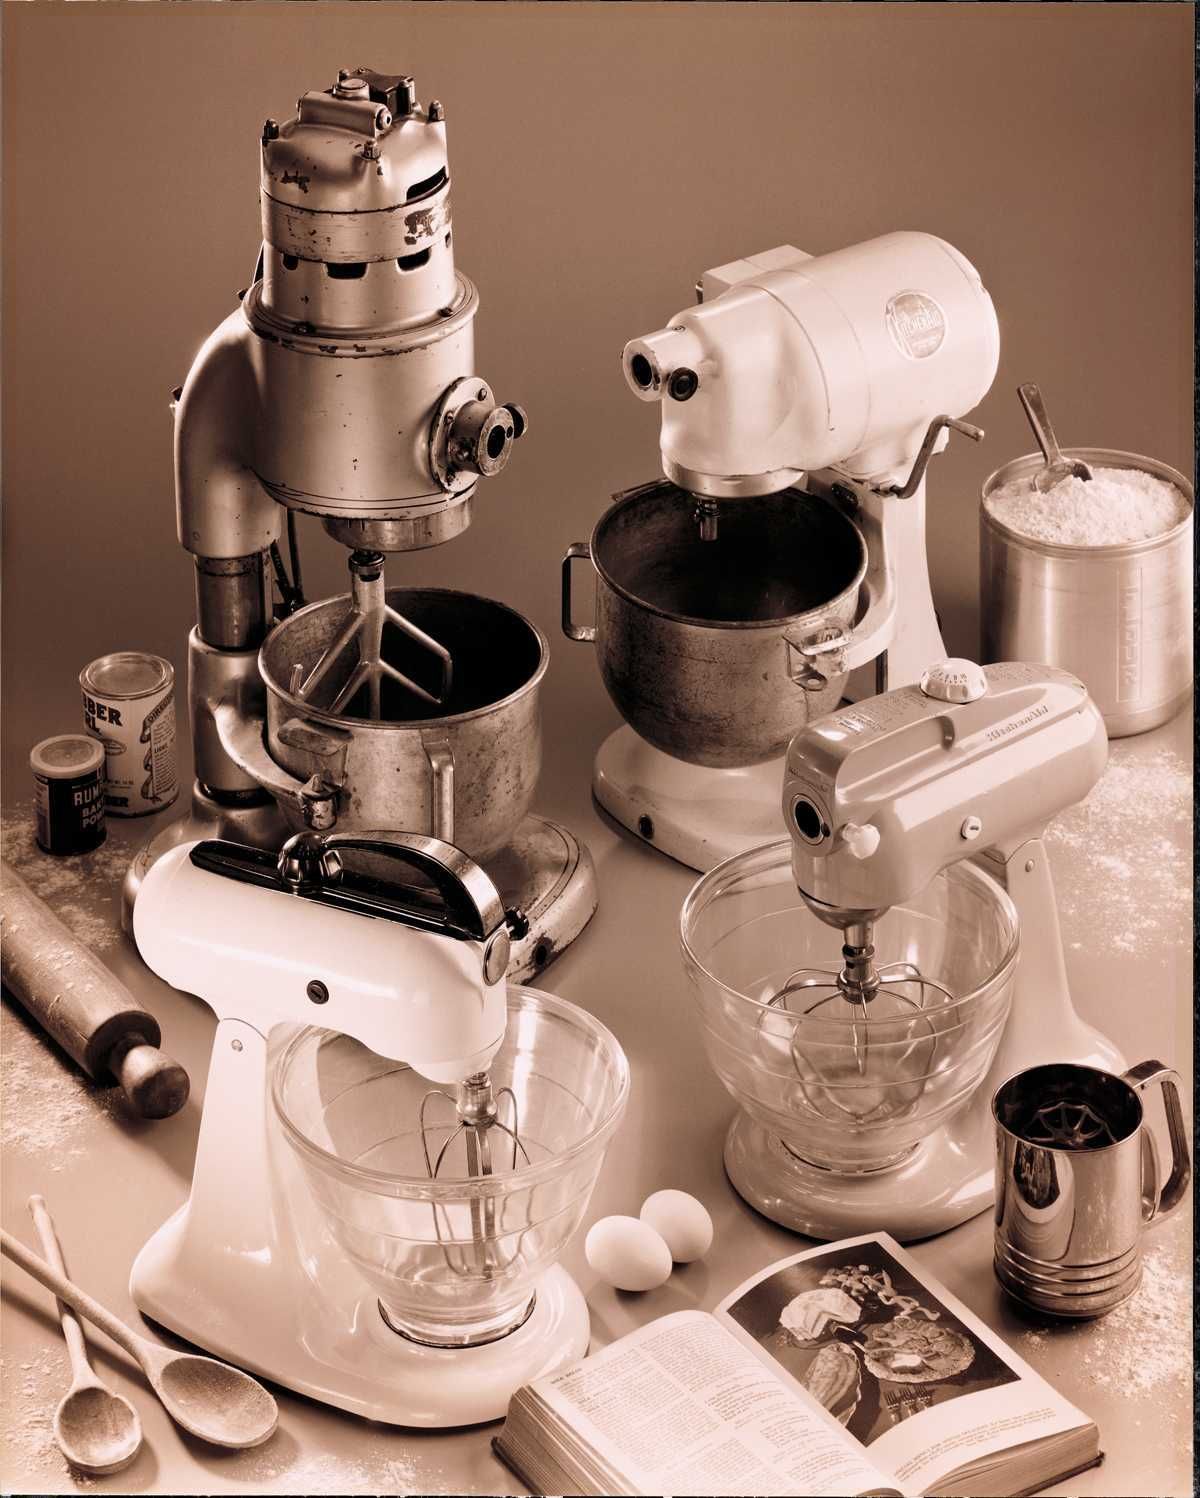 https://hips.hearstapps.com/hmg-prod/images/vintage-kitchen-aid-stand-mixers-1587744264.jpg